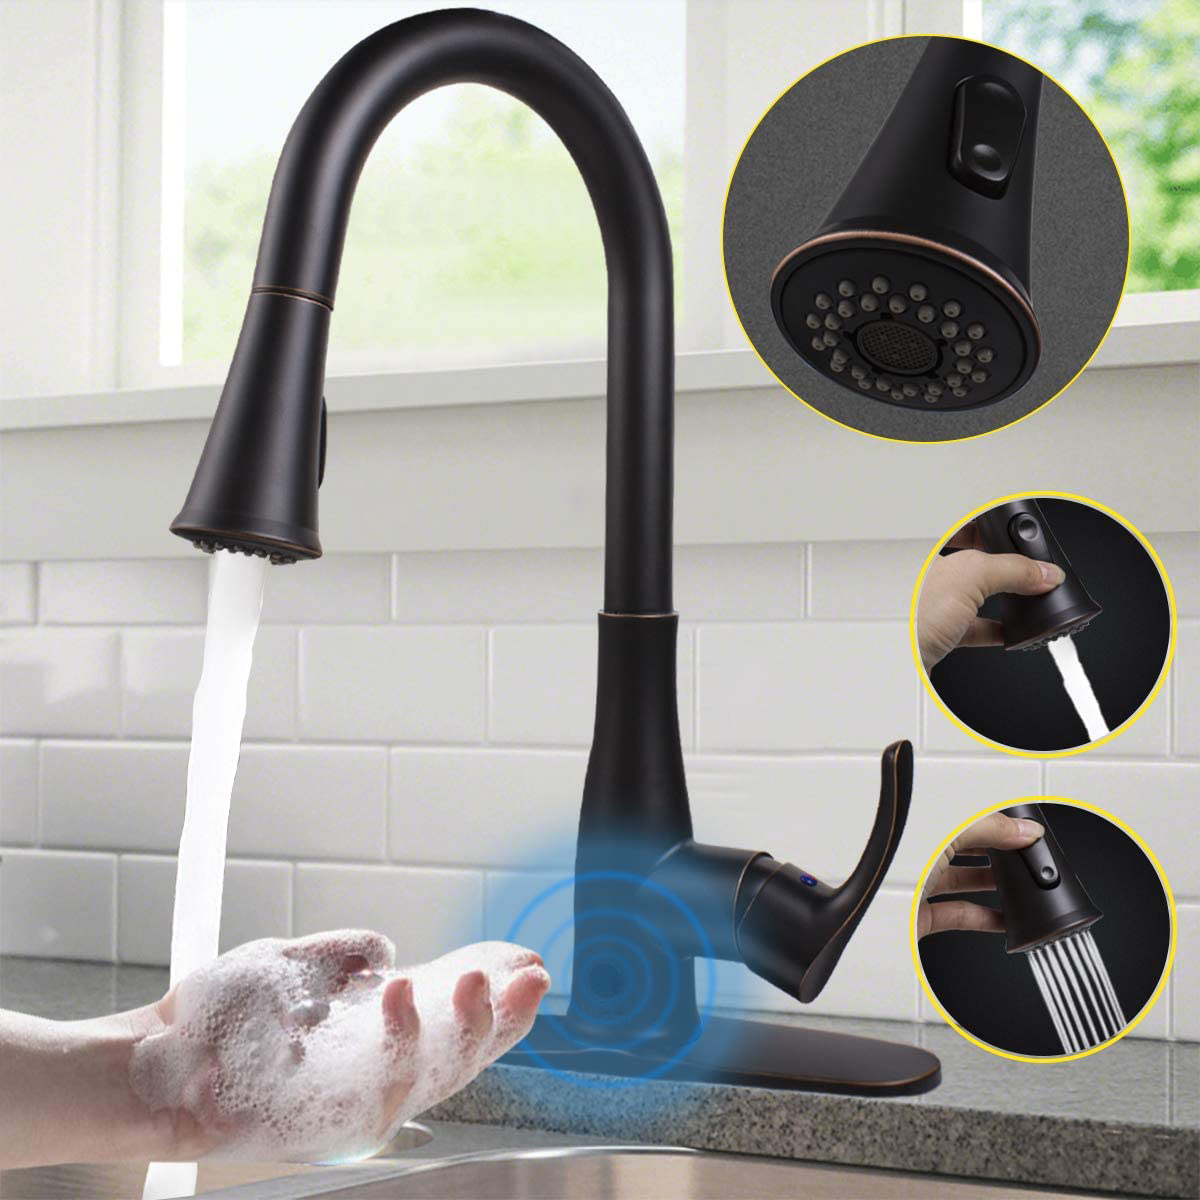 Aquacubic Ouchless Kitchen Faucets, Motion Sensor Automatic Kitchen Sink Faucet with Pull Down Sprayer Single Handle Dual Spray Setting Stainless Steel Oil Rubbed Bronze Black - 1 Or 3 Hole De